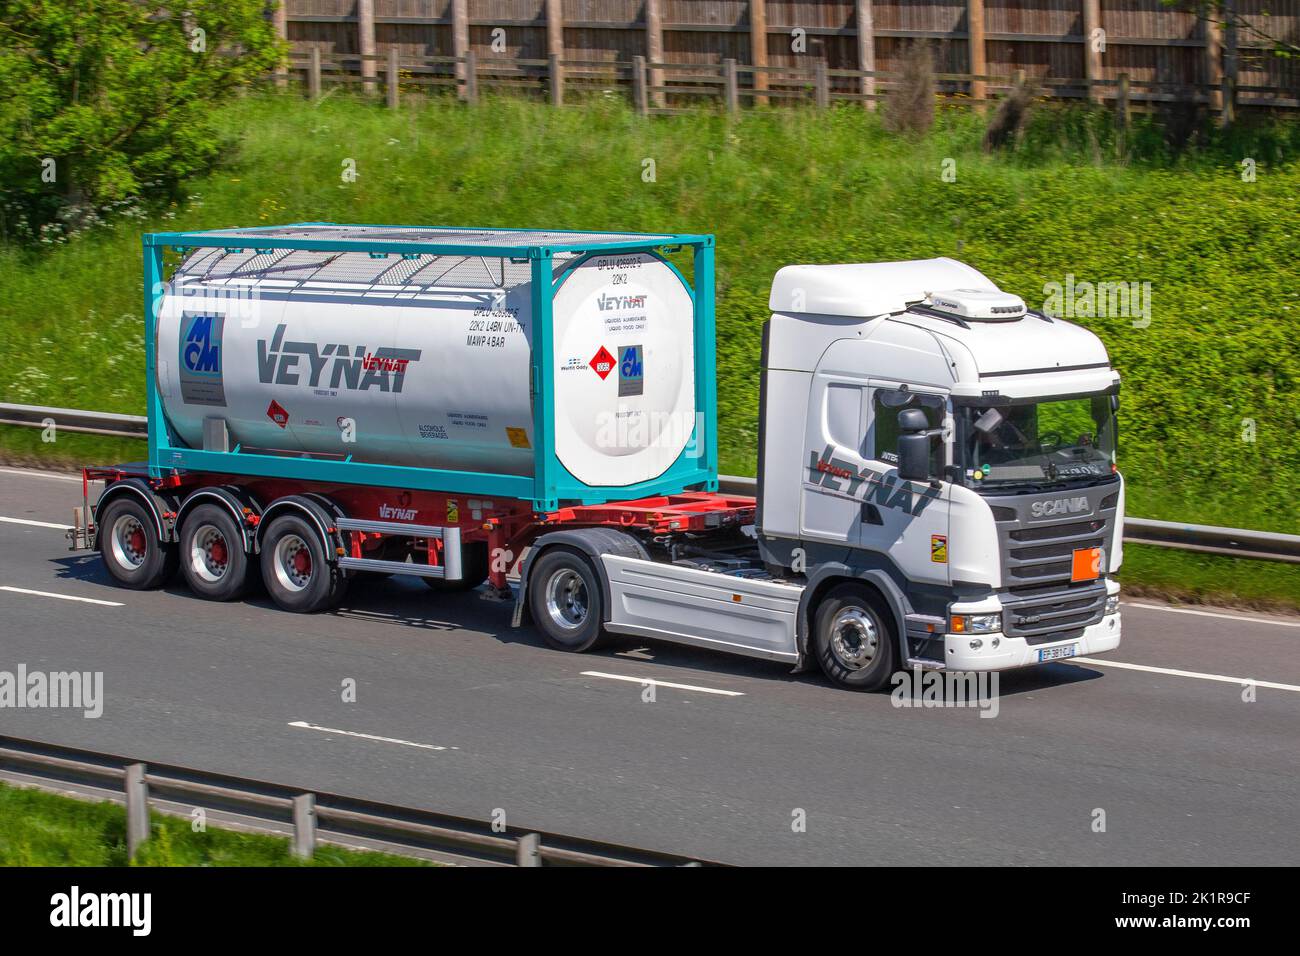 Transports Veynat, French liquid foods trucking freight HGV haulage company; Haulage delivery trucks, lorry, heavy-duty vehicles, transportation, truck, cargo carrier, vehicle, European commercial transport industry HGV, M6 at Manchester, UK Stock Photo